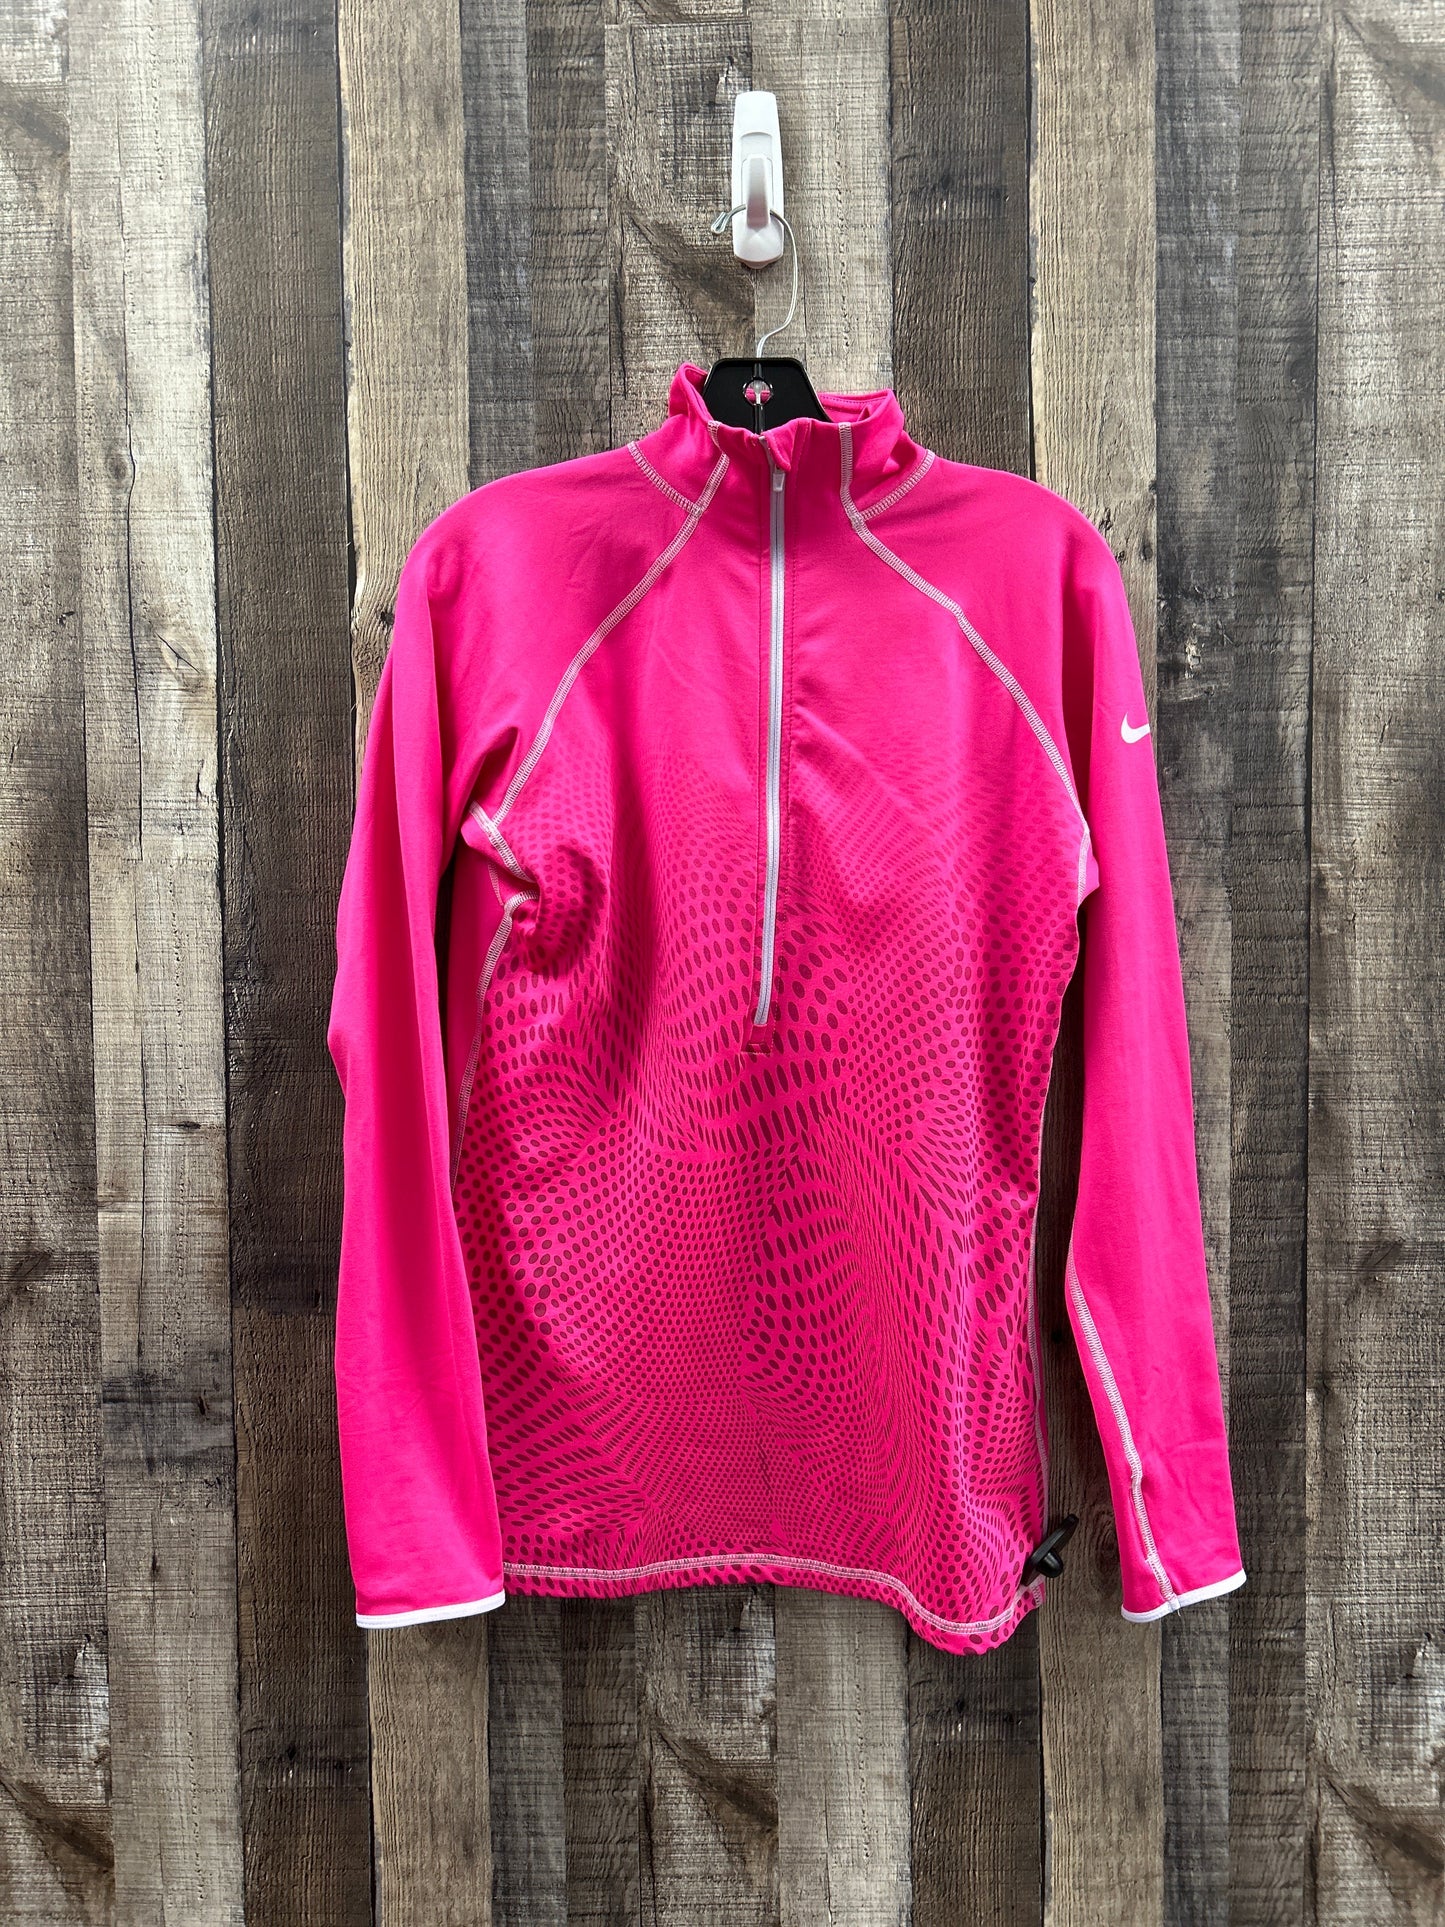 Pink Athletic Top Long Sleeve Collar Nike Apparel, Size L